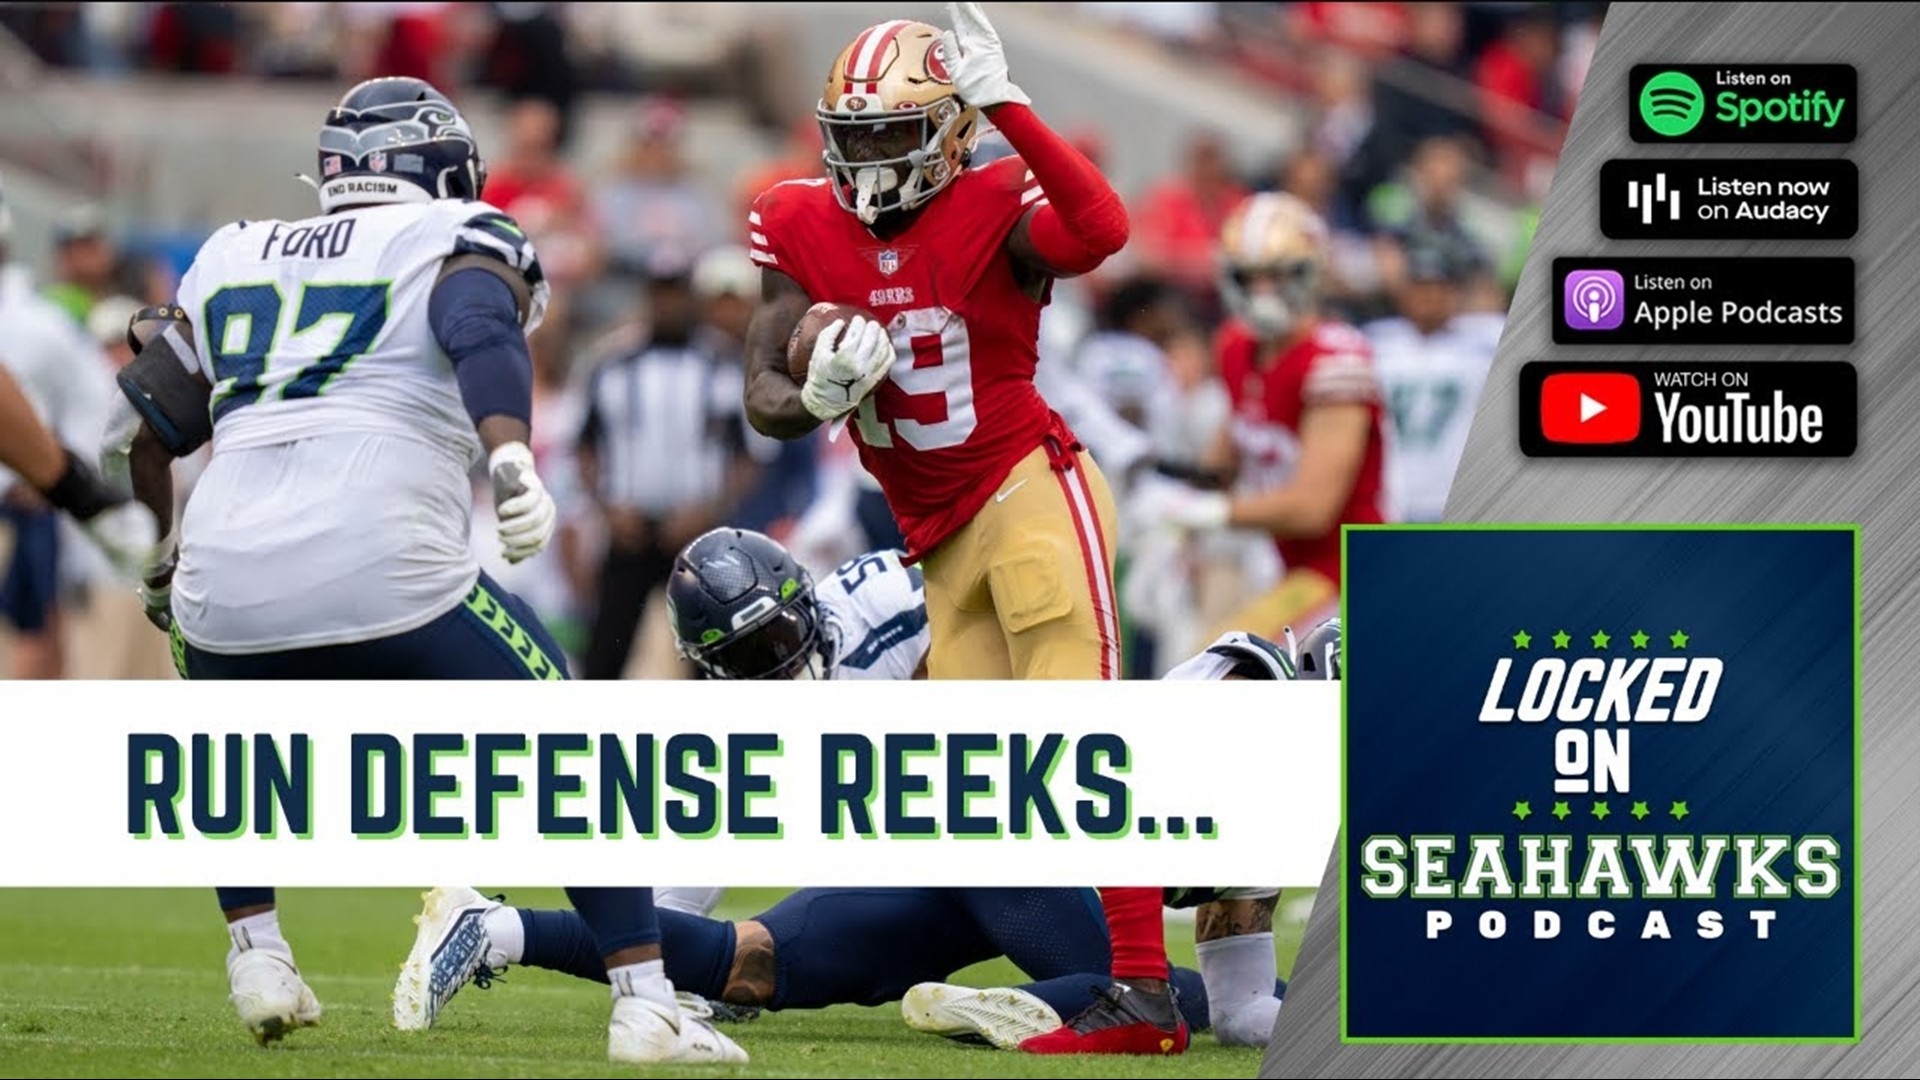 Hosts Corbin Smith and Rob Rang examine what has gone wrong for Seattle defending the run, what must happen for the team to quickly fix the issue, and more.